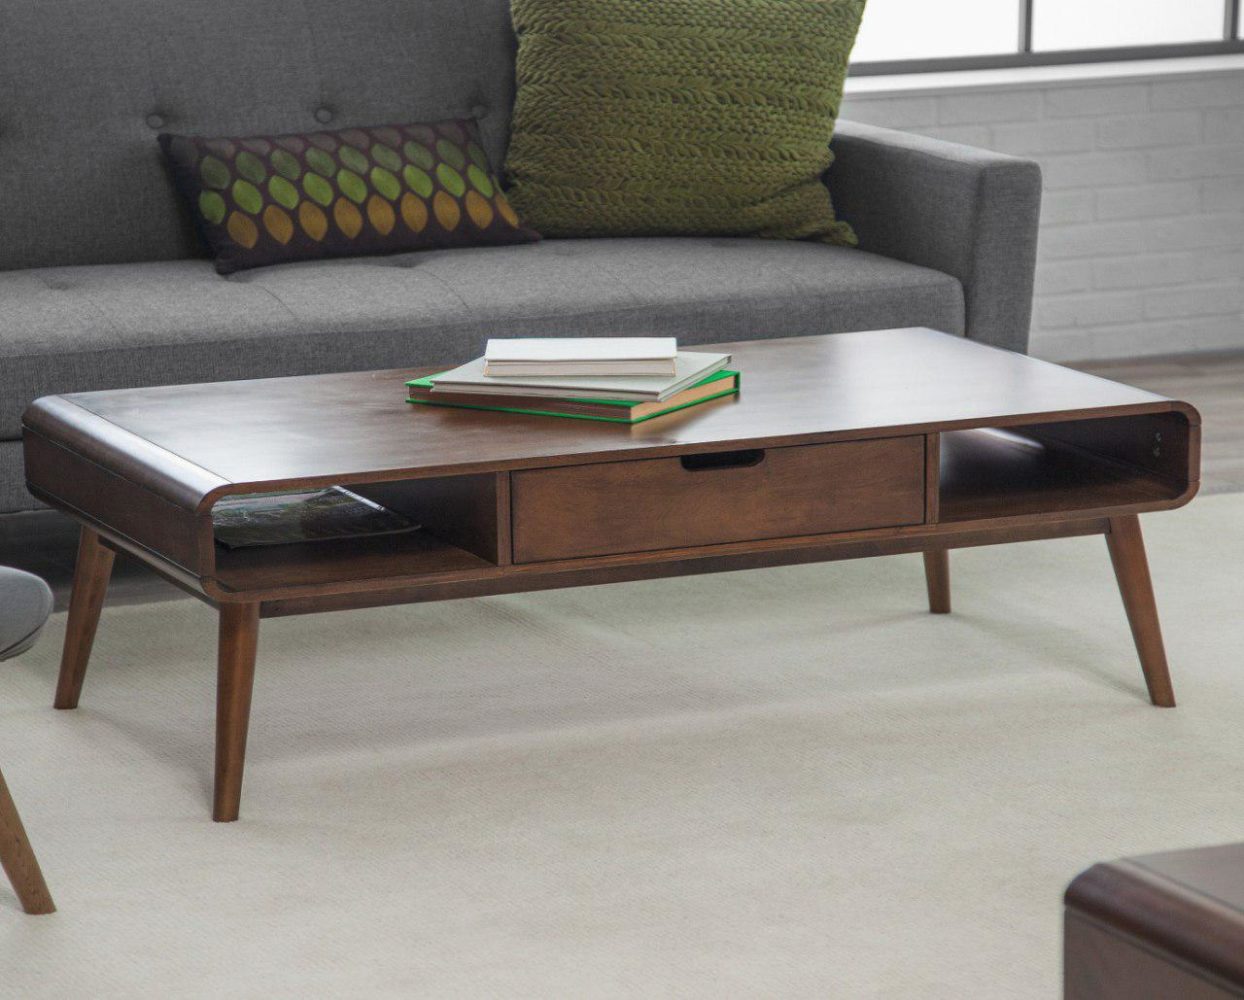 Wooden coffee table with books and sofa - Taskmasters Dubai